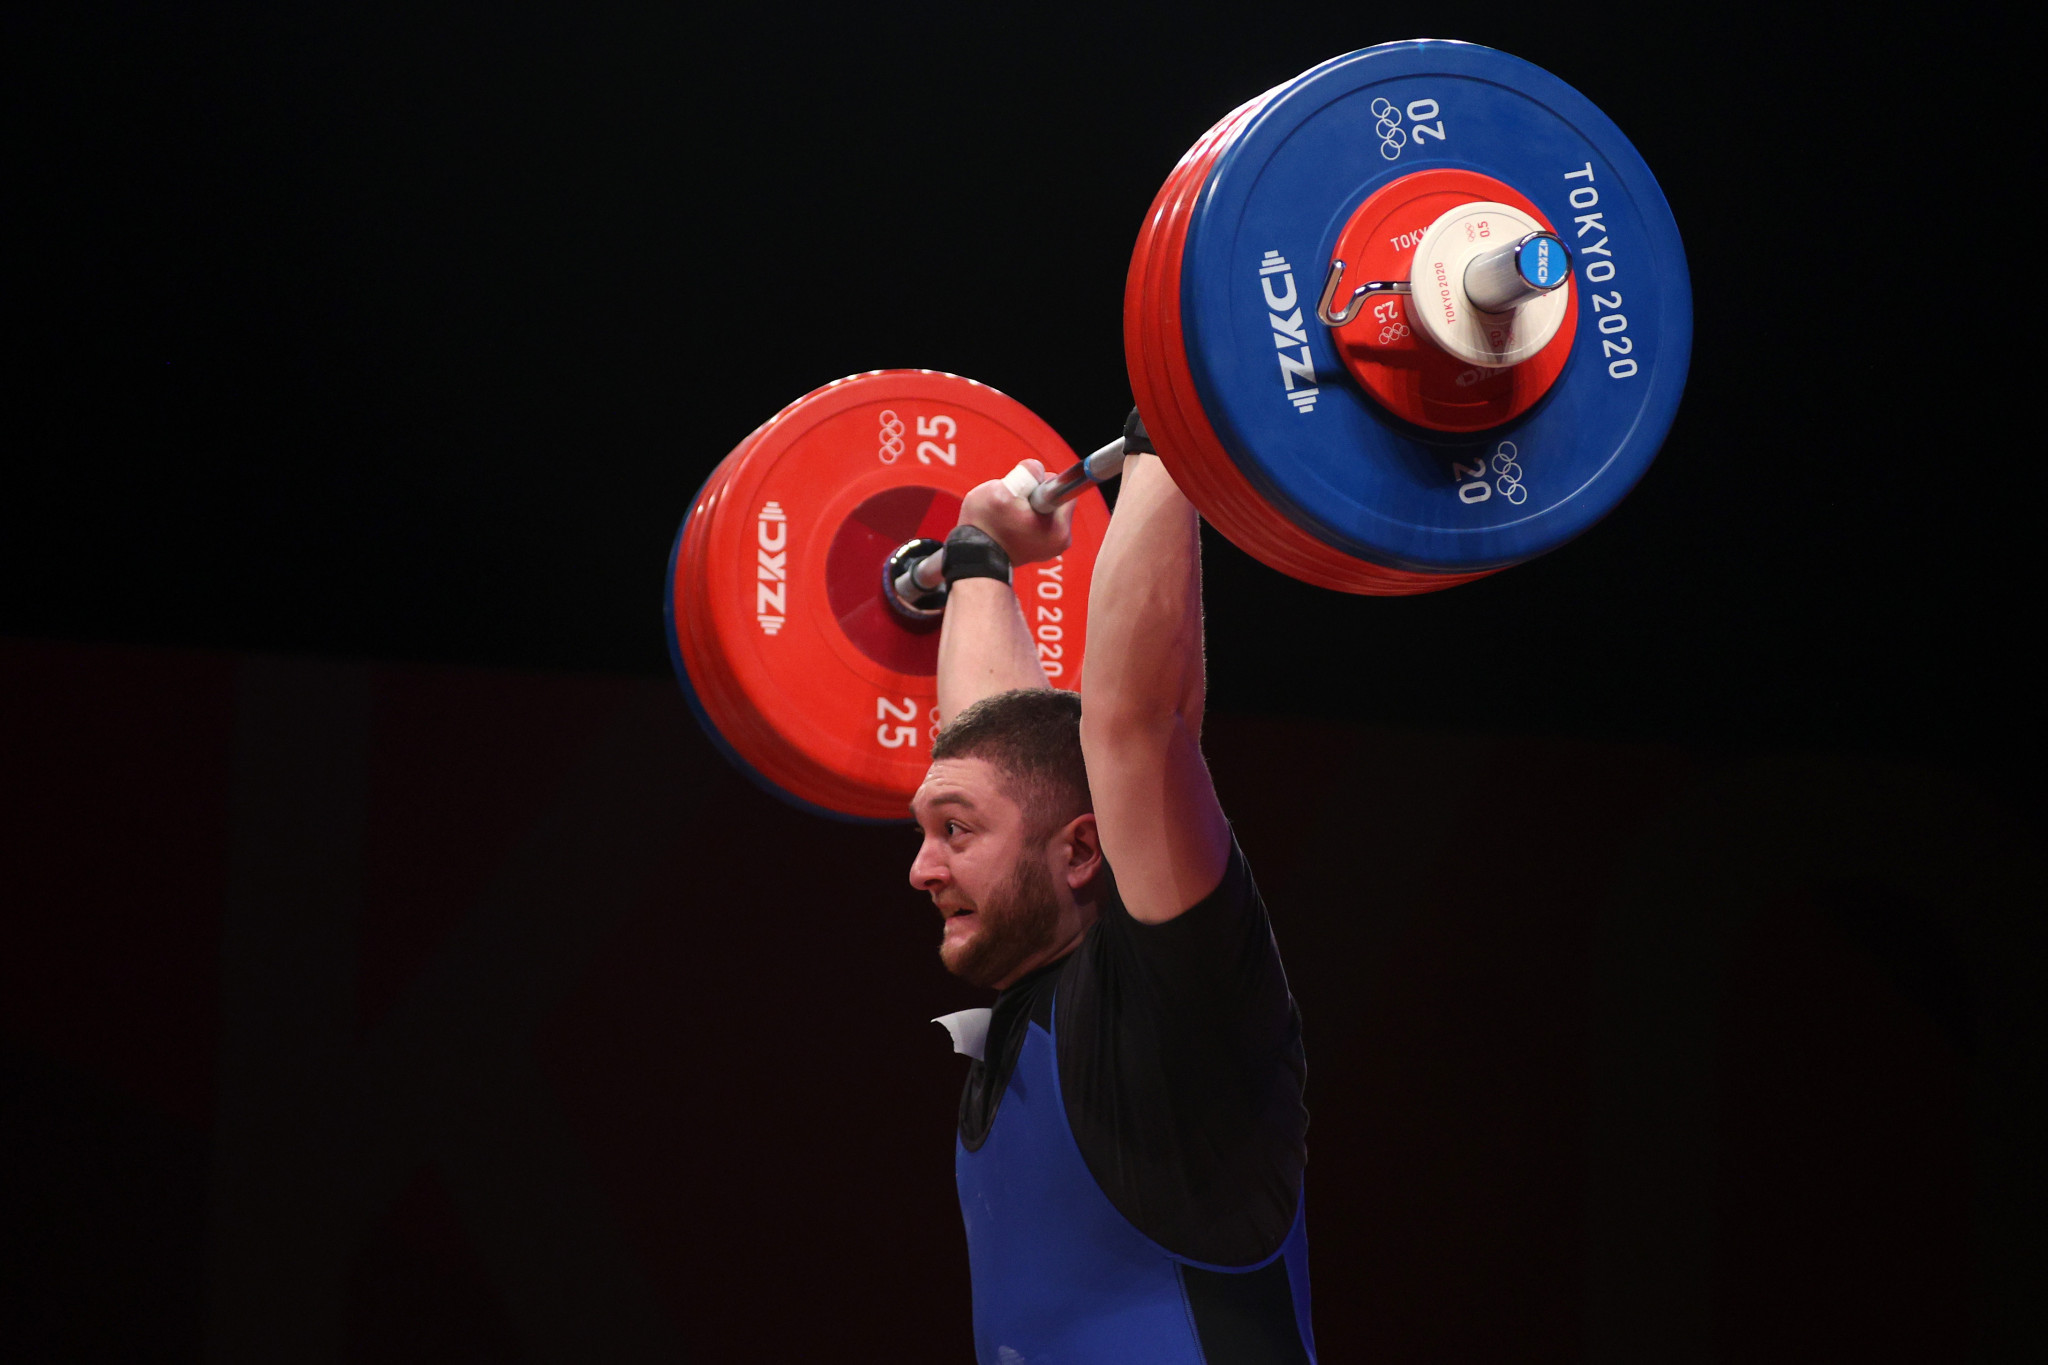 Weightlifters from Russia and Belarus can join Paris 2024 qualifying after IWF vote